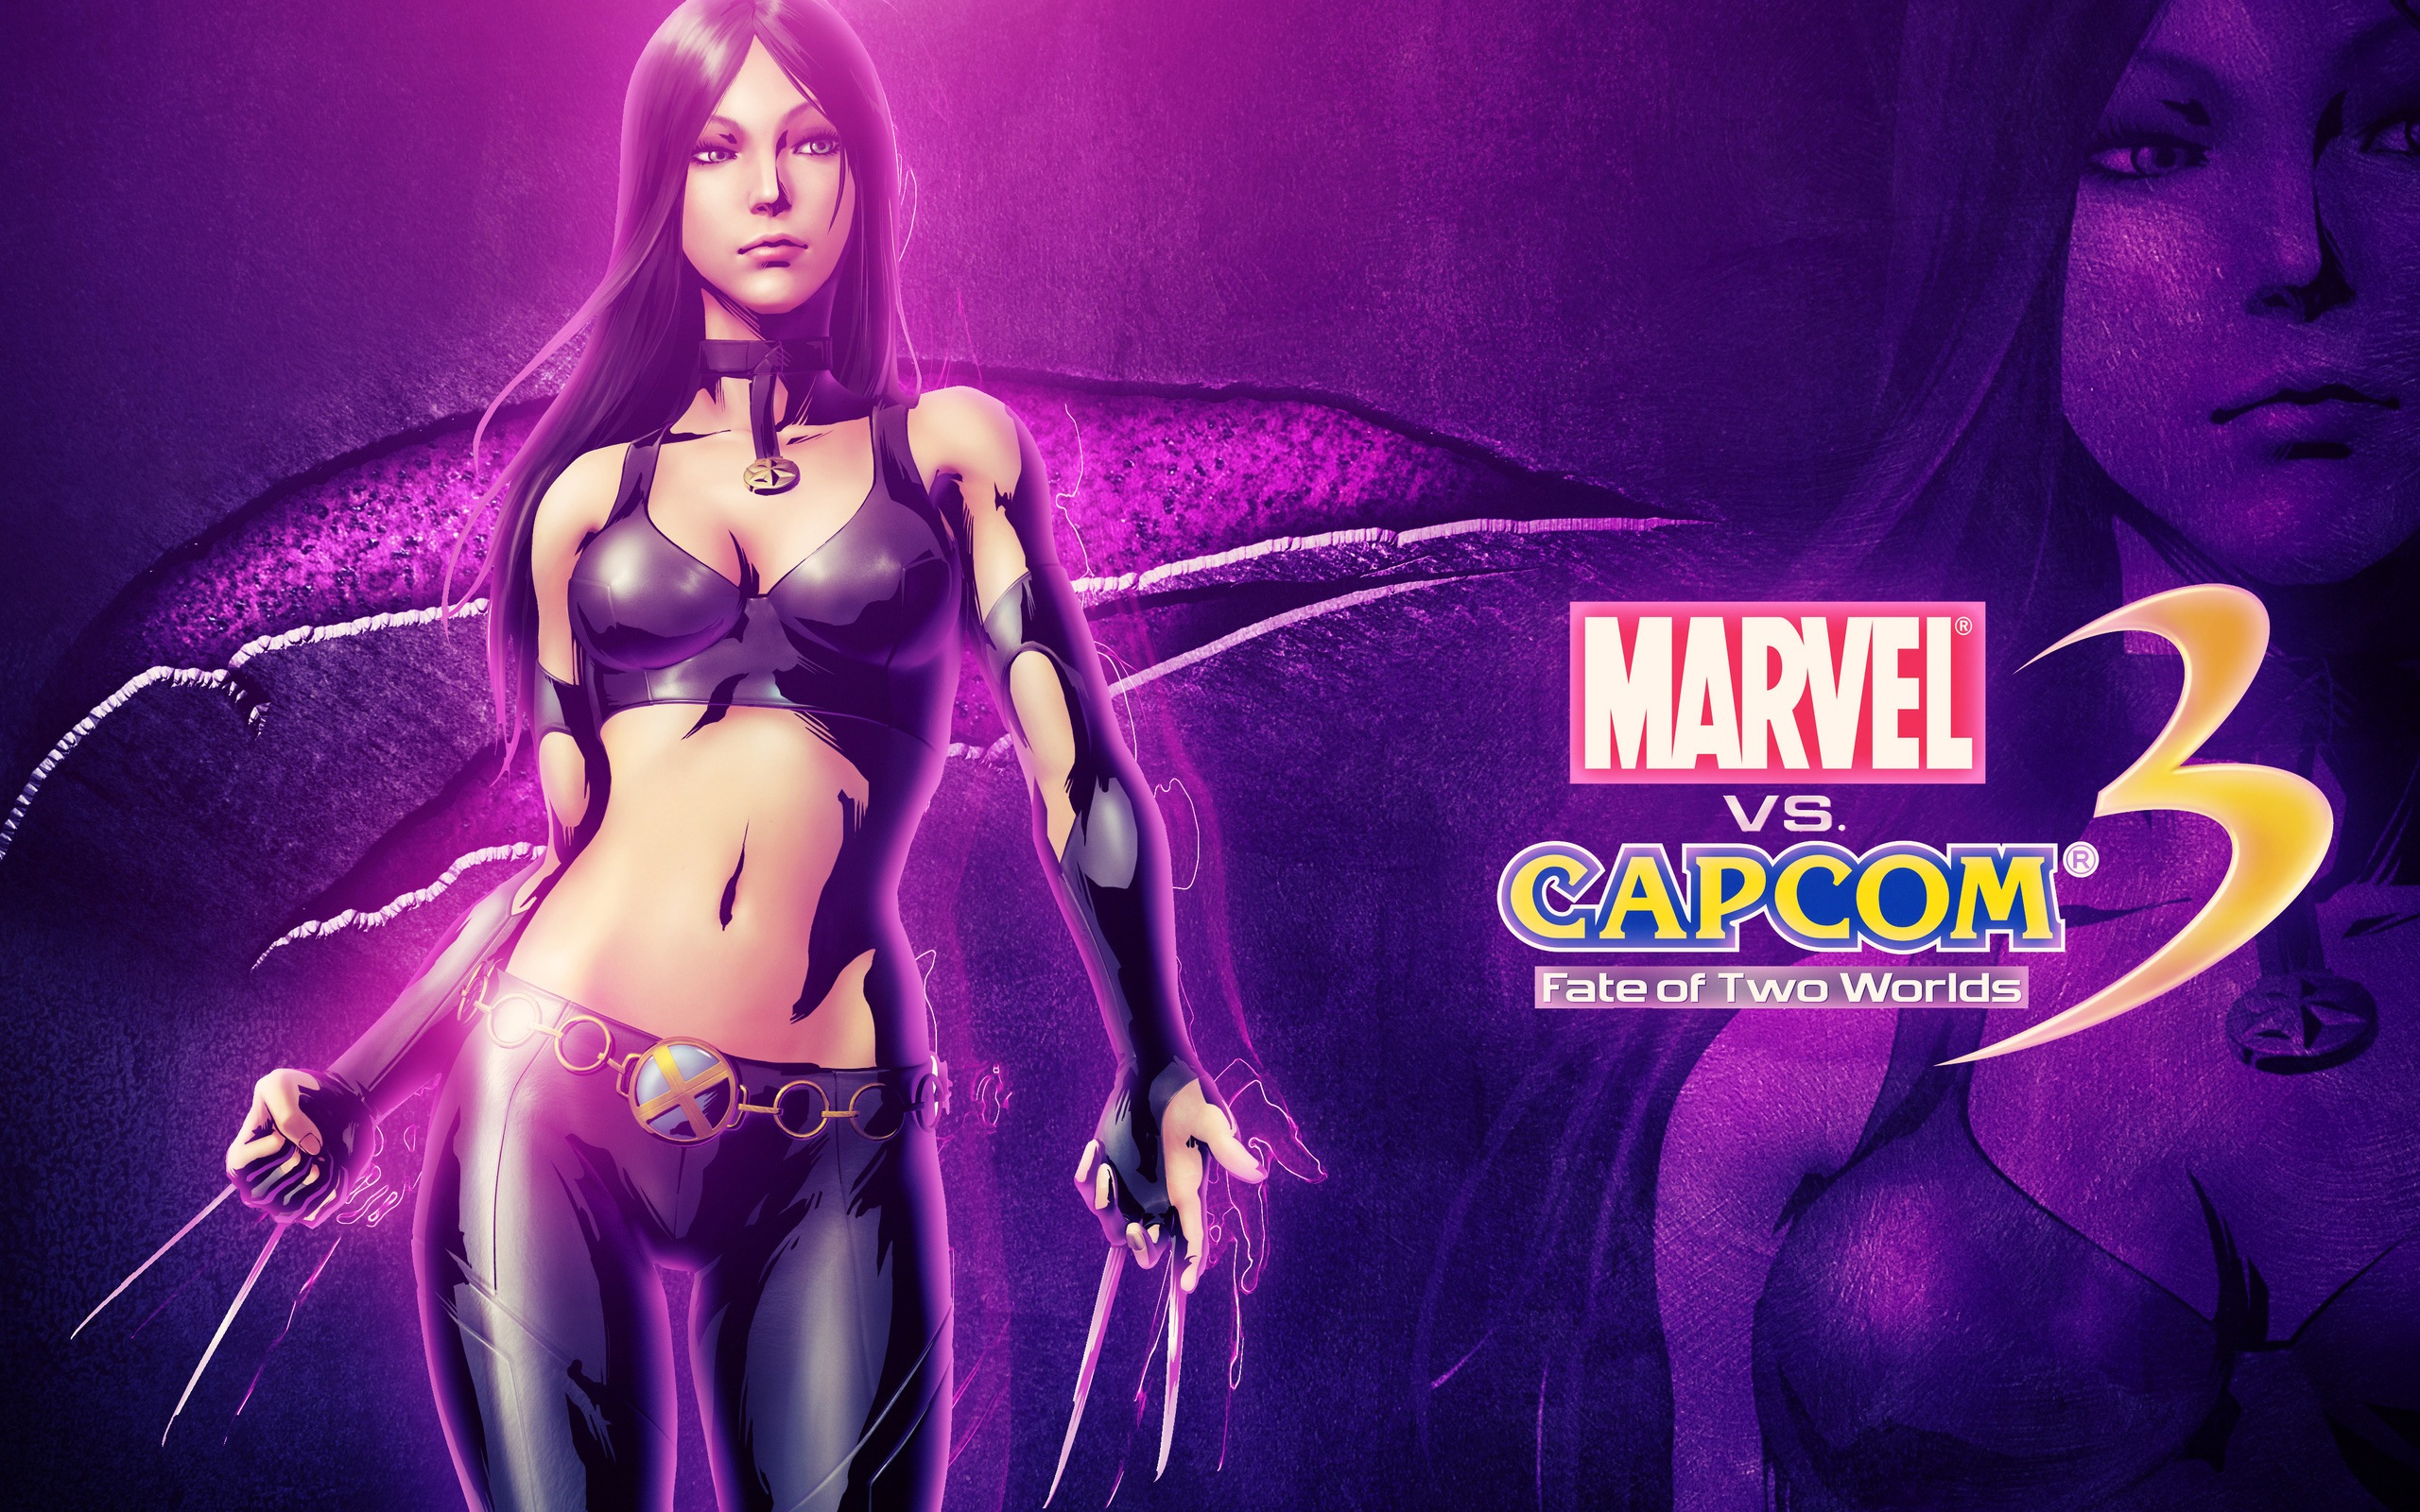 Marvel VS. Capcom 3: Fate of Two Worlds HD game wallpapers #10 - 2560x1600